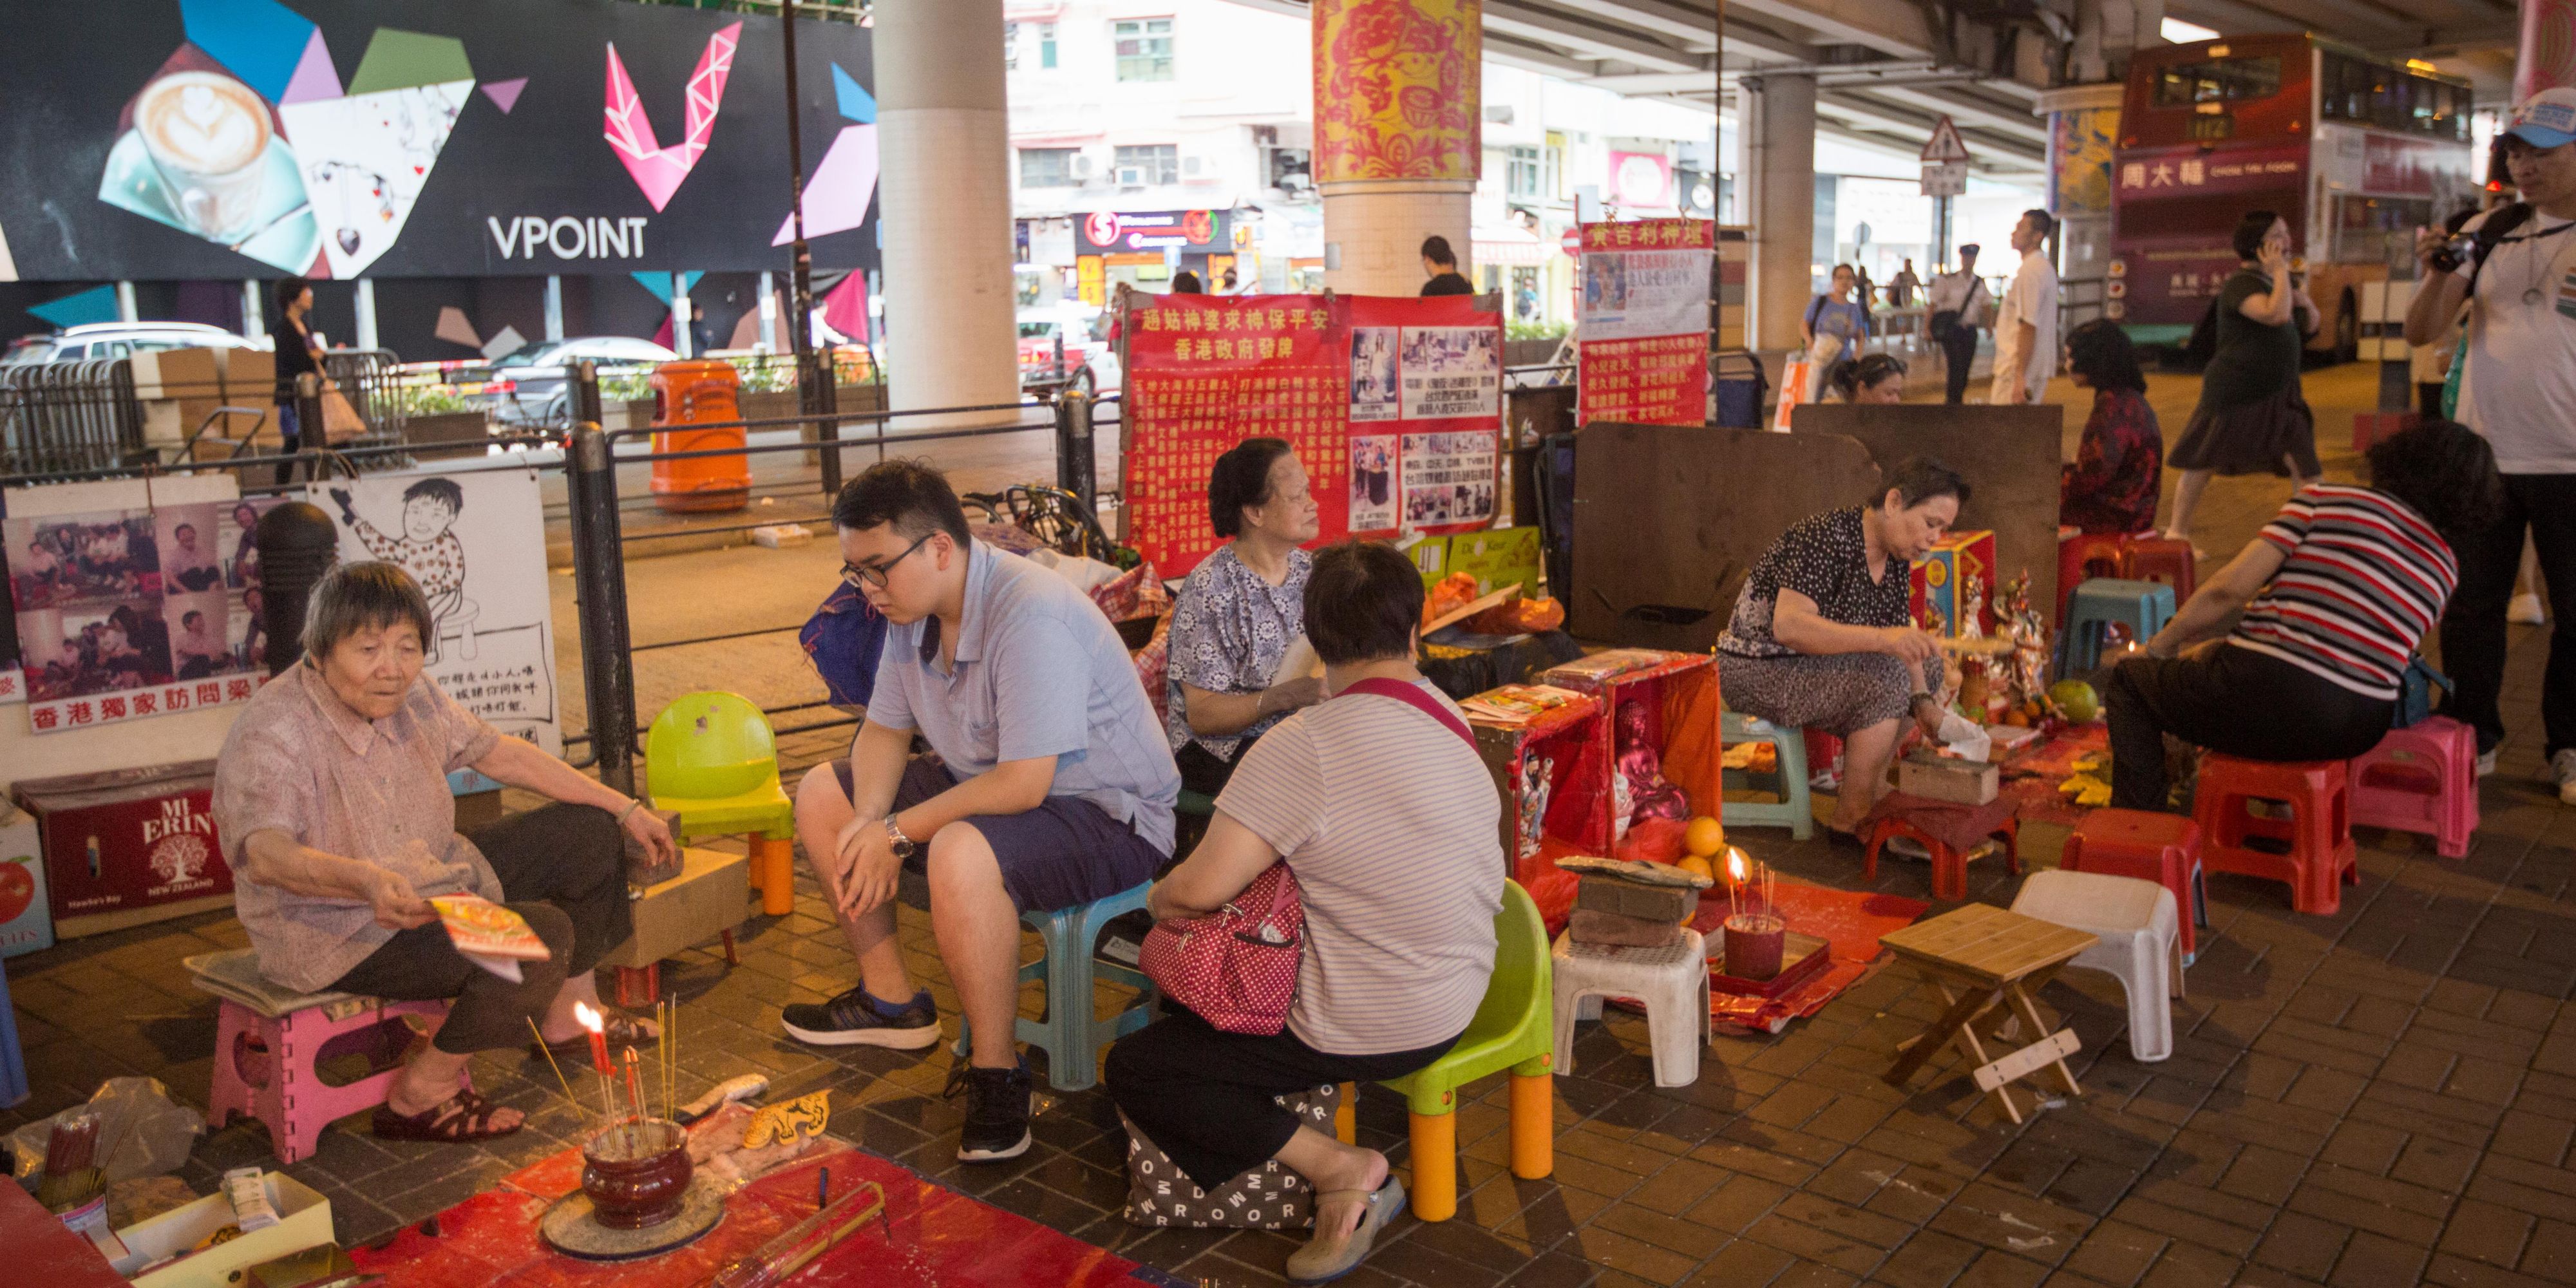 Besides shopping in Causeway Bay, it may be time to visit the Canal Road Flyover also known as Ngo Keng Kiu literally meaning “Goose-Neck-Bridge”. There you can witness the local ritual of beating a paper doll with a shoe known as “Villain Hitting”.